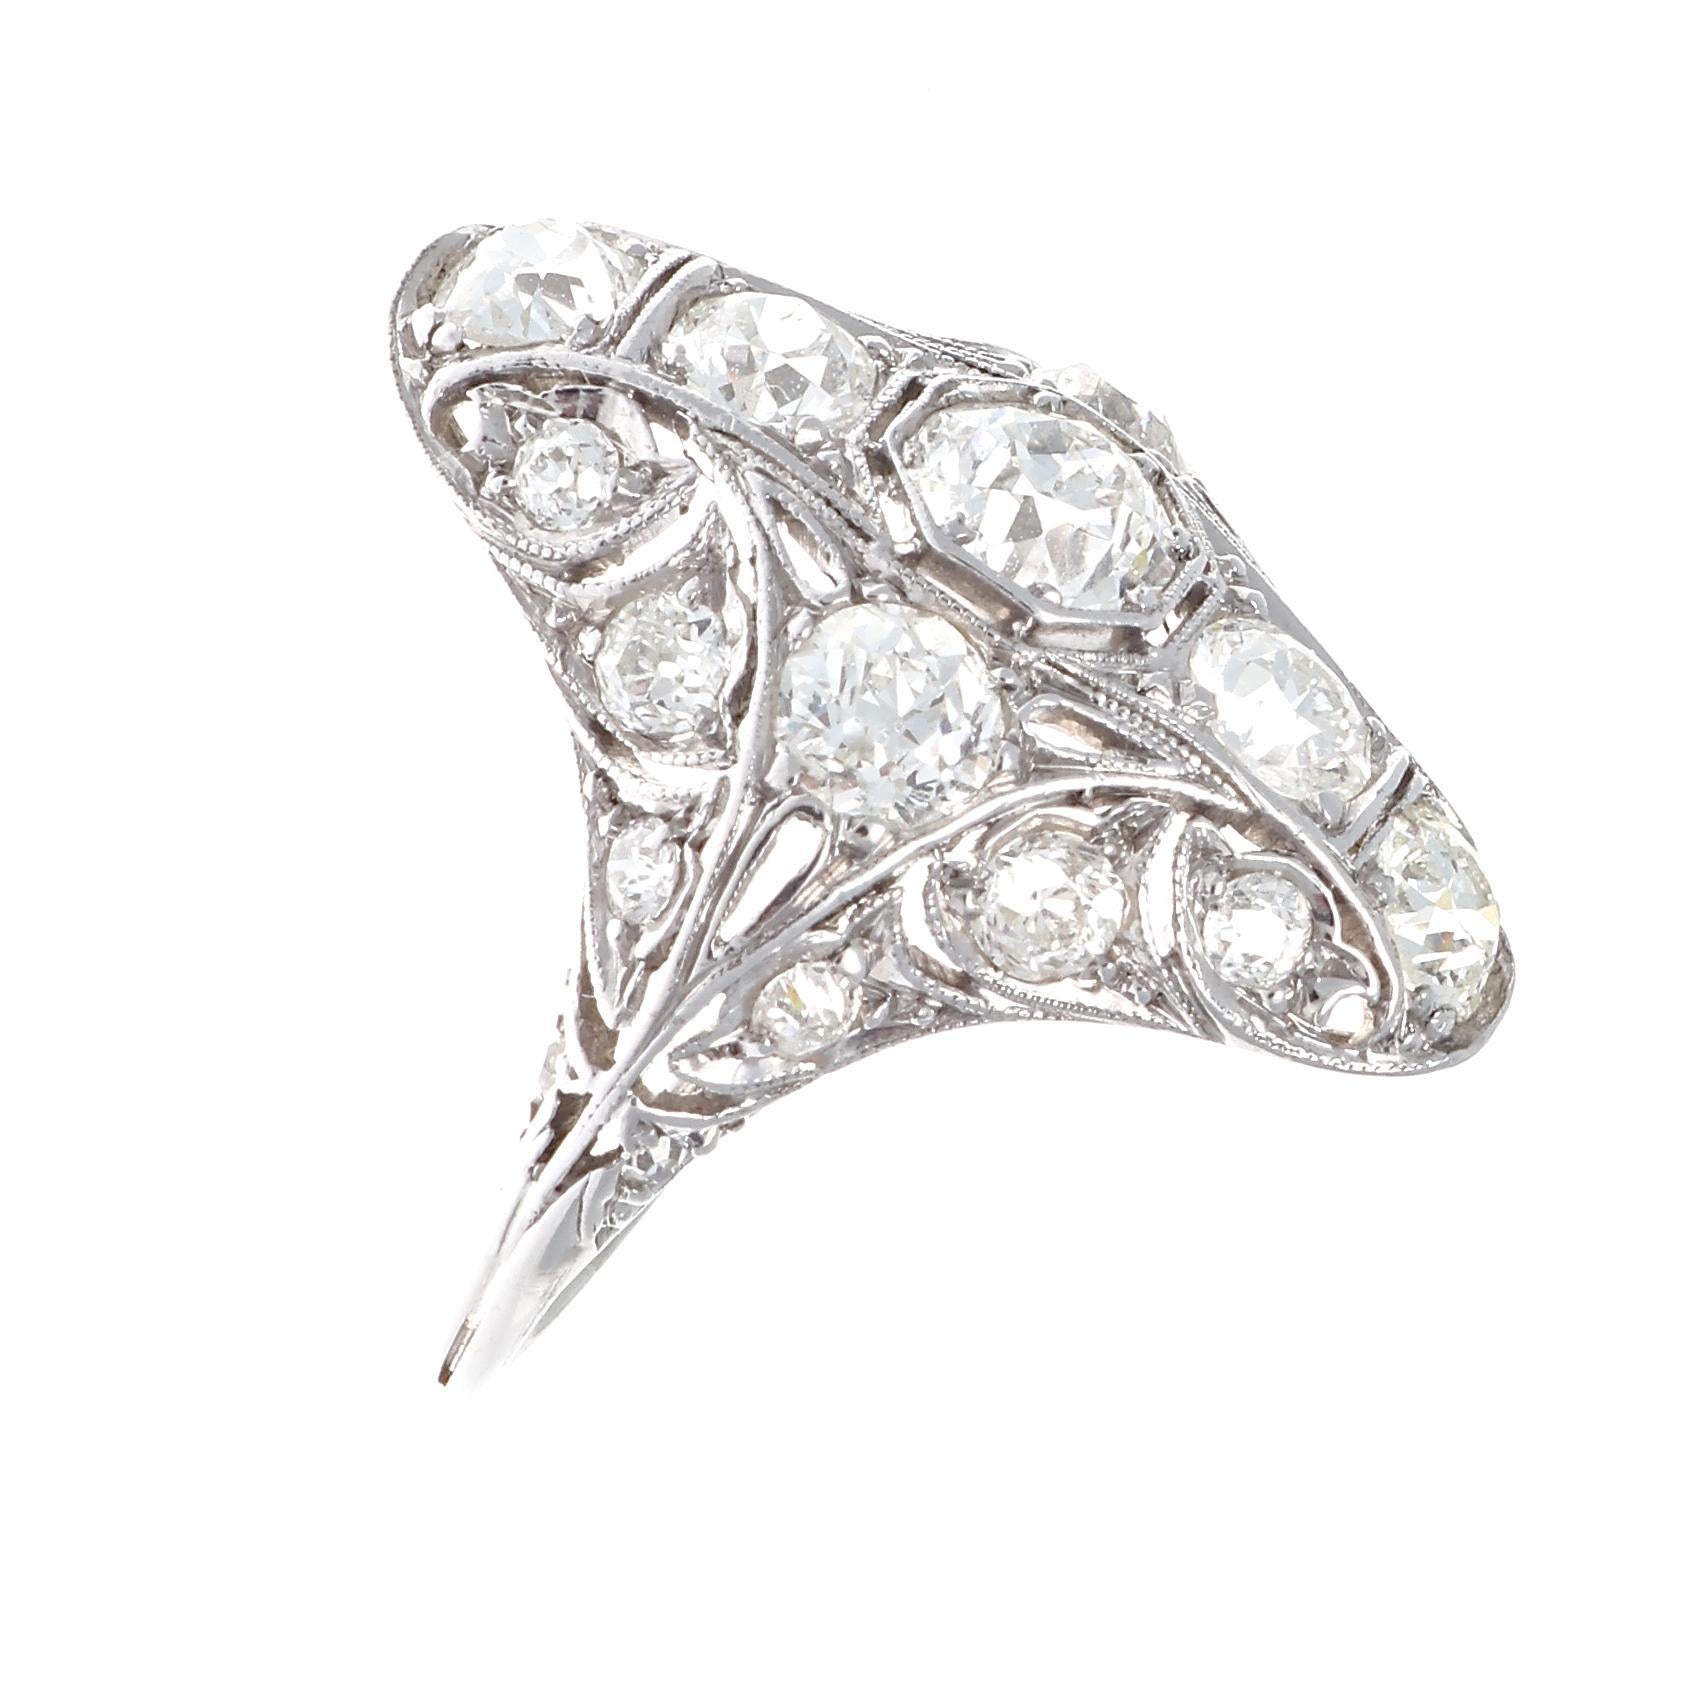 When you want a statement ring that is bold yet elegant, this Edwardian navette ring is the perfect choice. Set in platinum and containing approximately 3.50 carats of G-H color, VS-SI old European cut lively diamonds. This exquisitely crafted ring